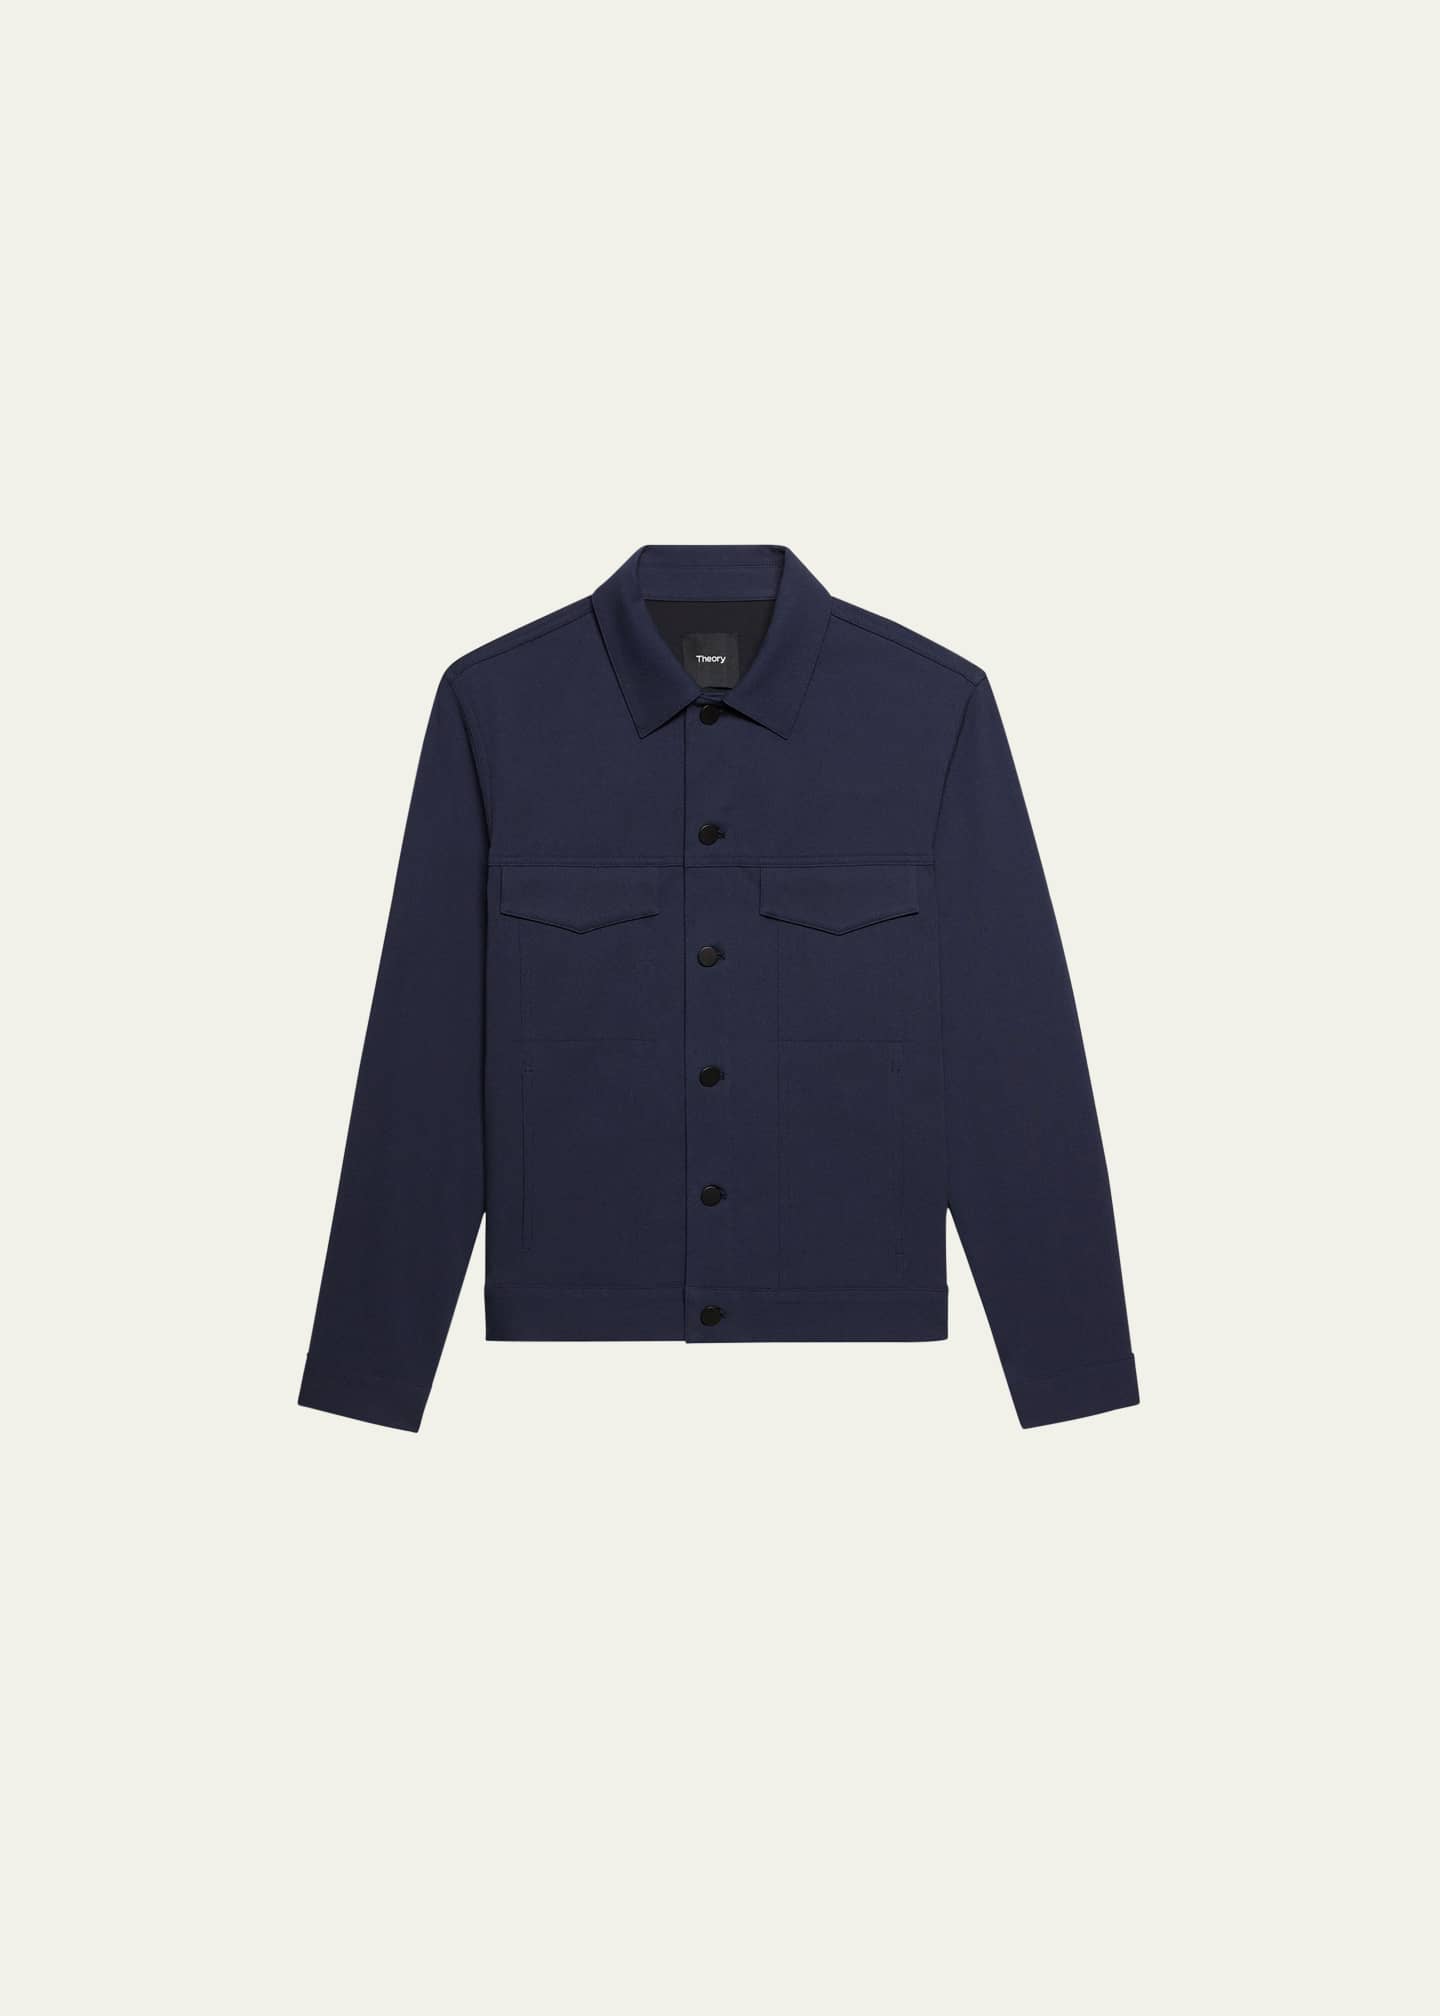 Theory Men's The River Jacket in Neoteric Twill - Bergdorf Goodman